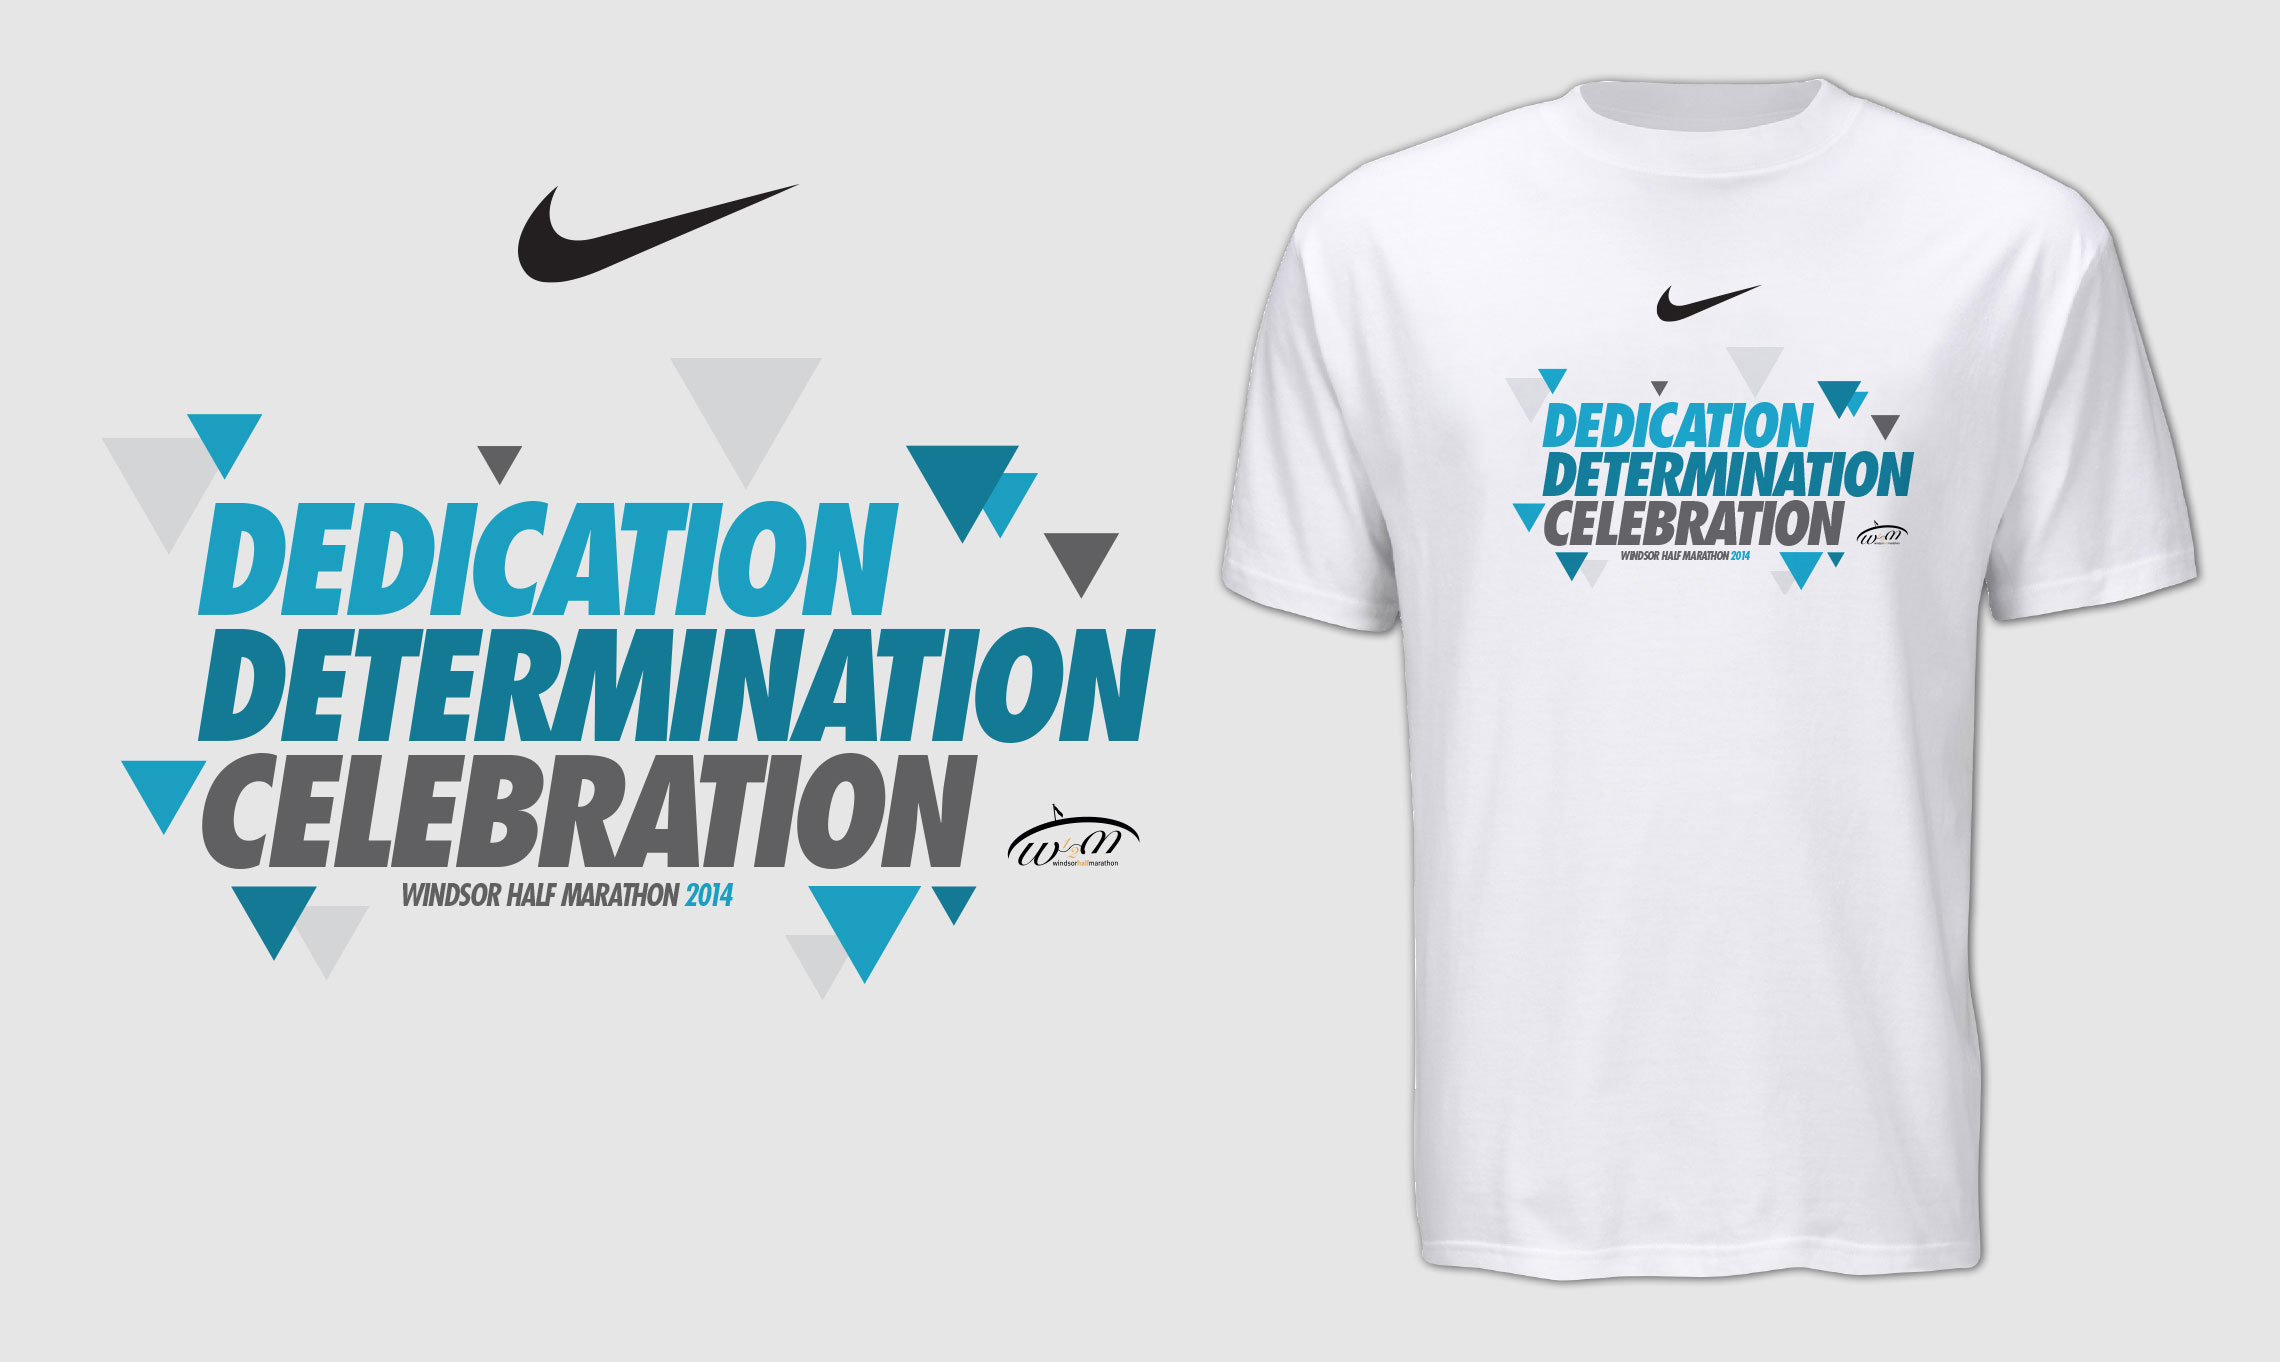 nike designs for shirts